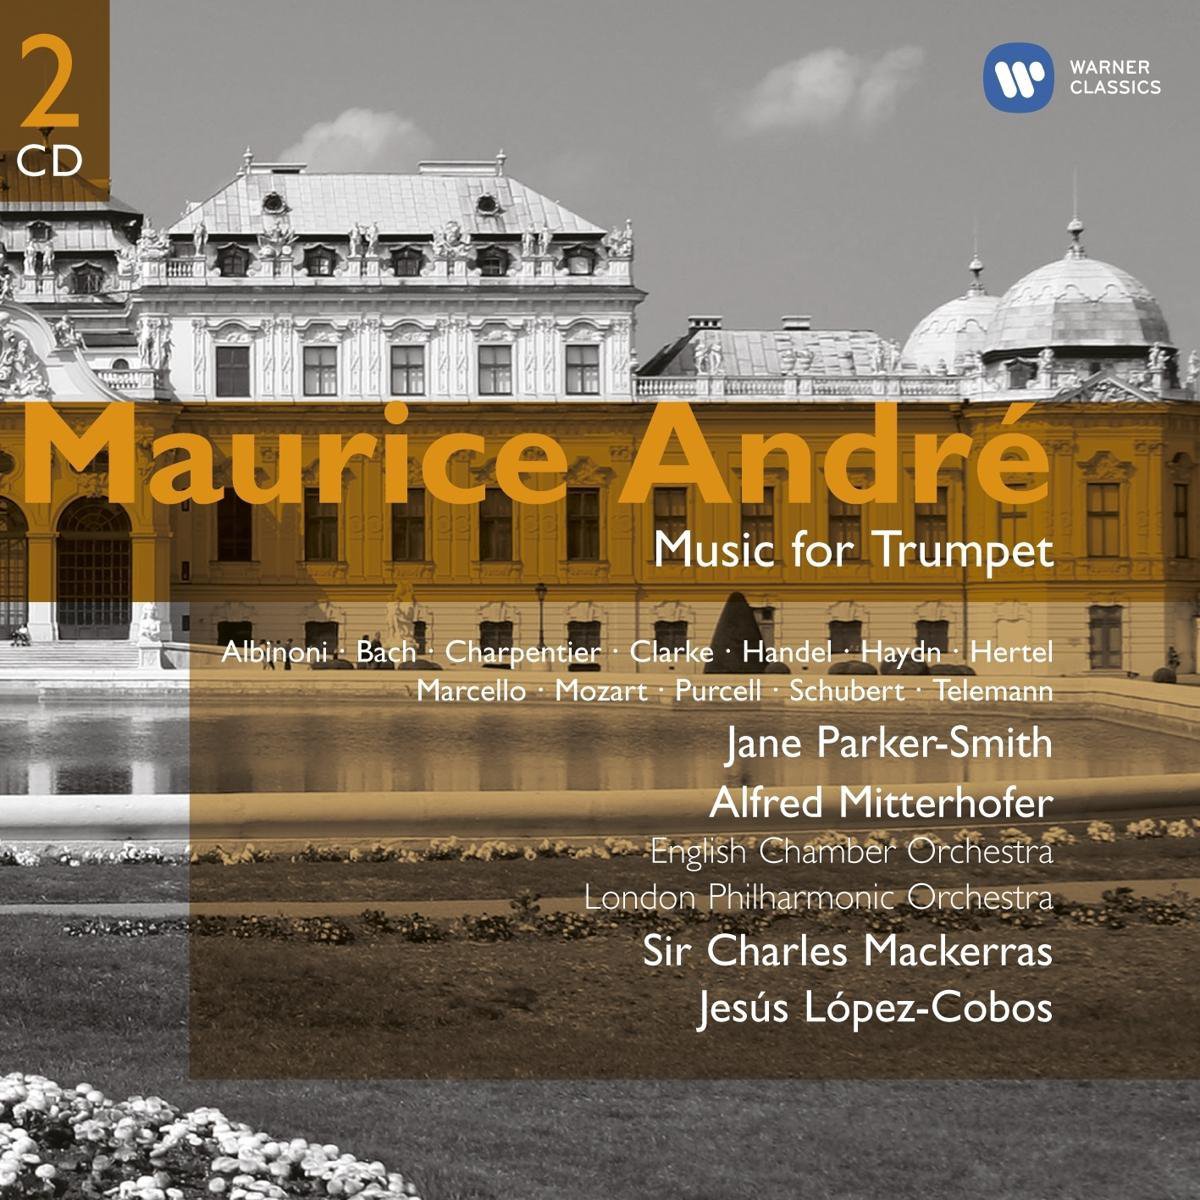 Music For Trumpet - Maurice Andre